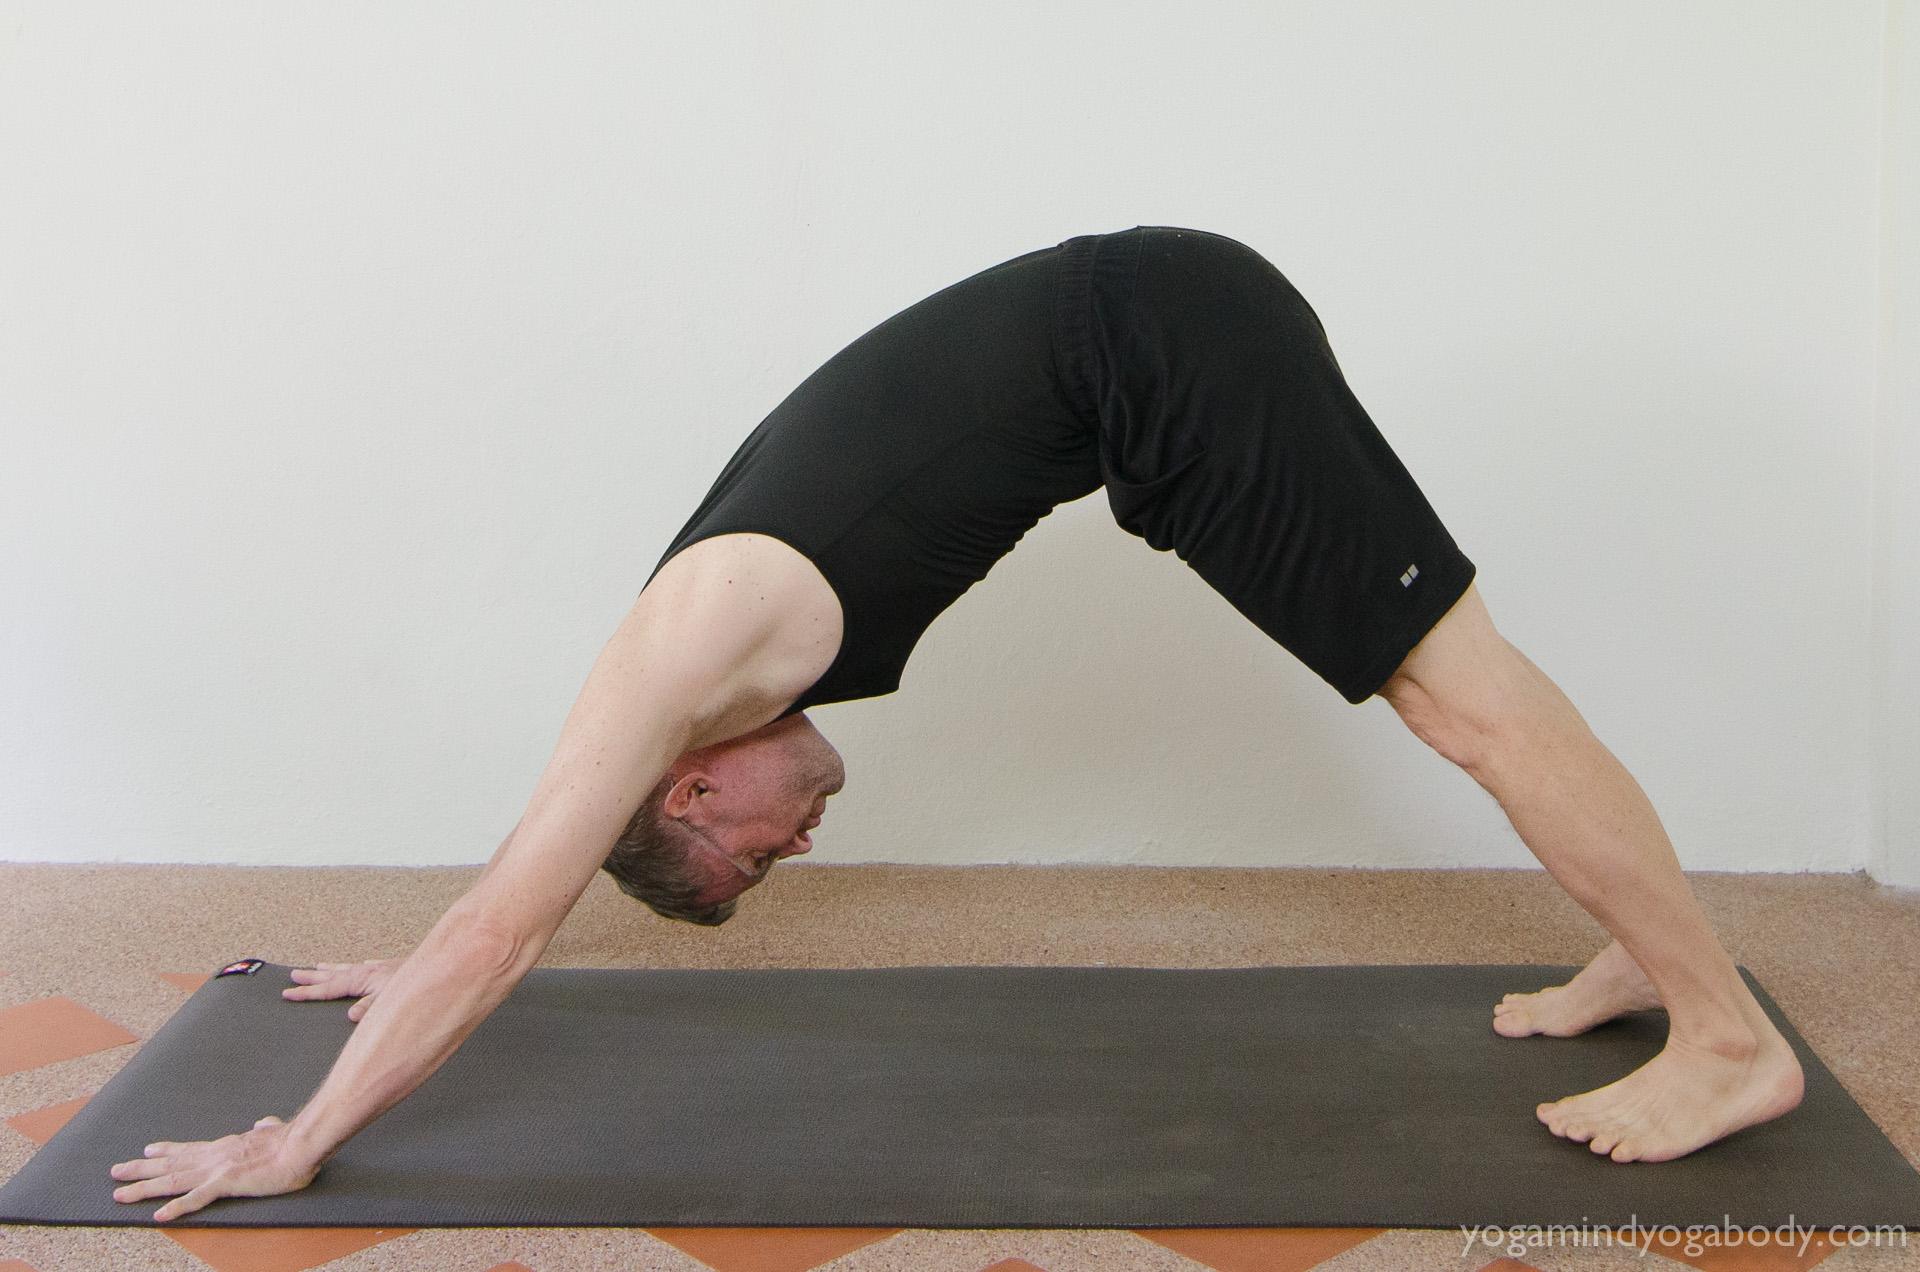 Why is Alignment Important in Yoga? — Yoga Alignment Guide